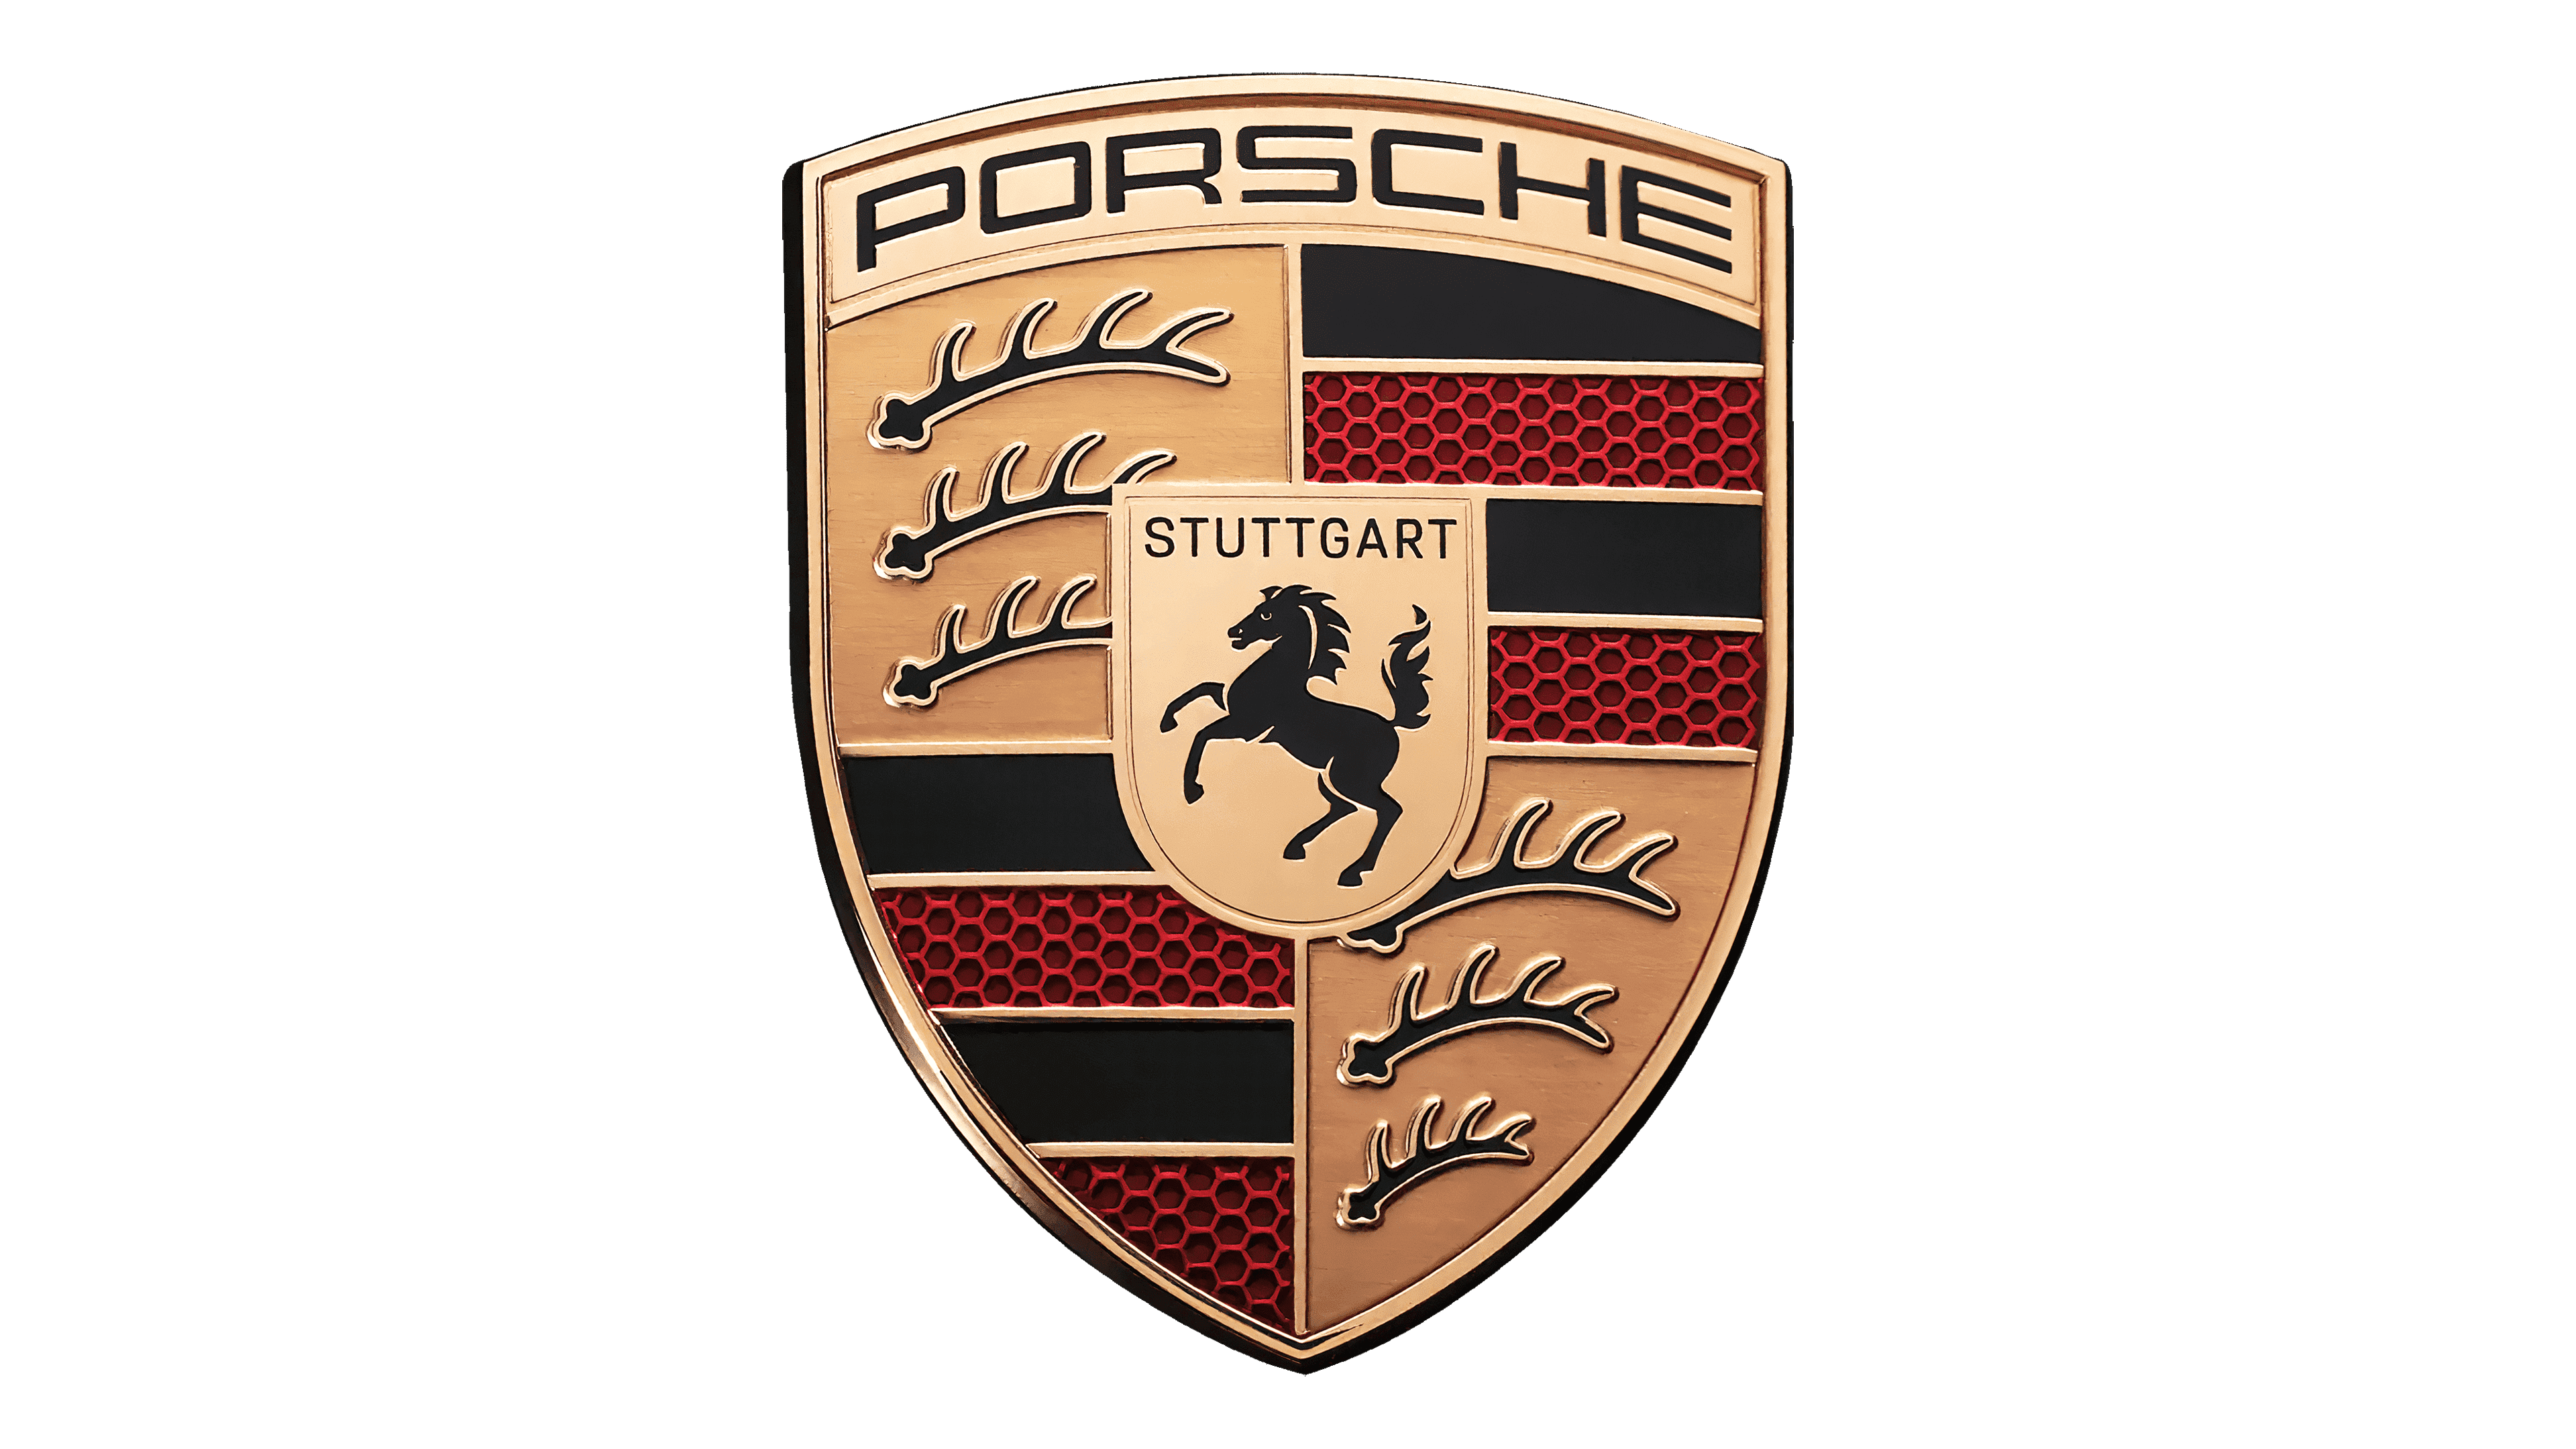 Everything you need to know about logo of porsche for car enthusiasts